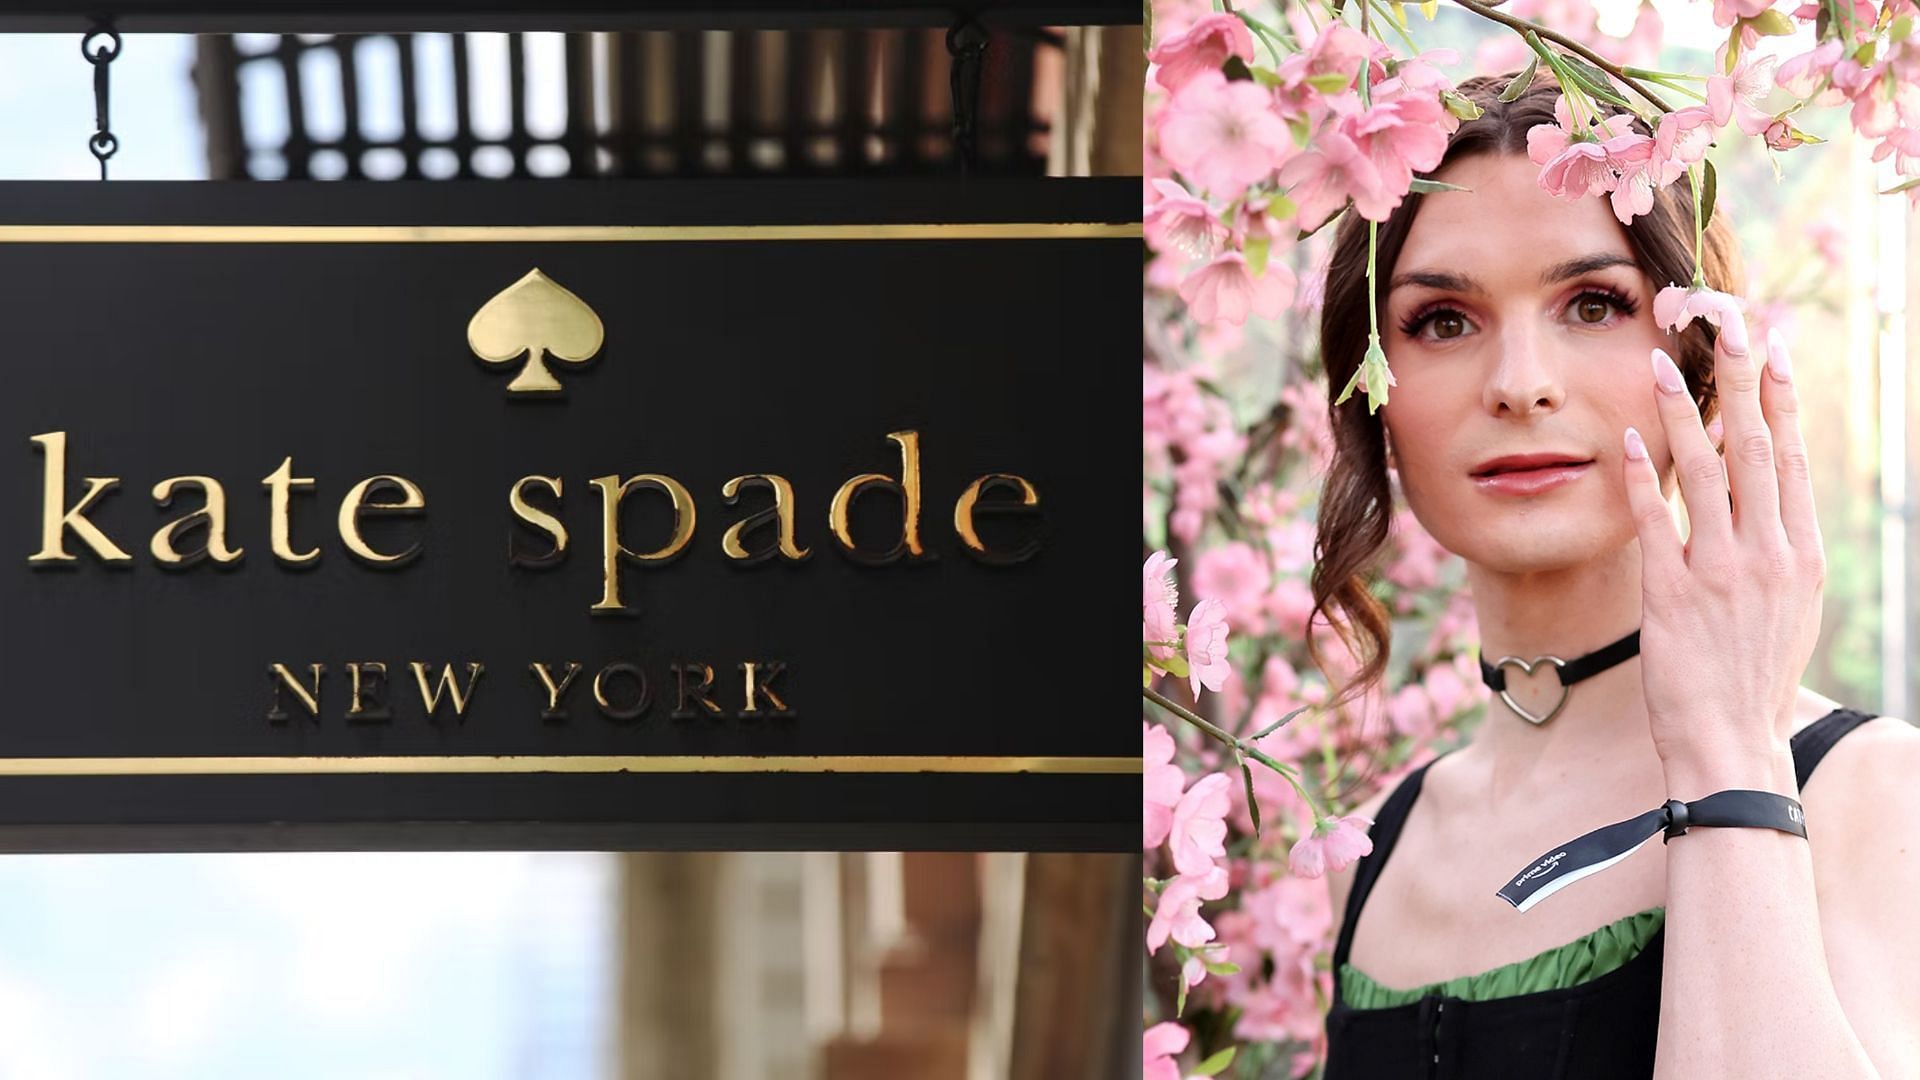 Kate Spade and Dylan Mulvaney. (Photos via Getty Images)